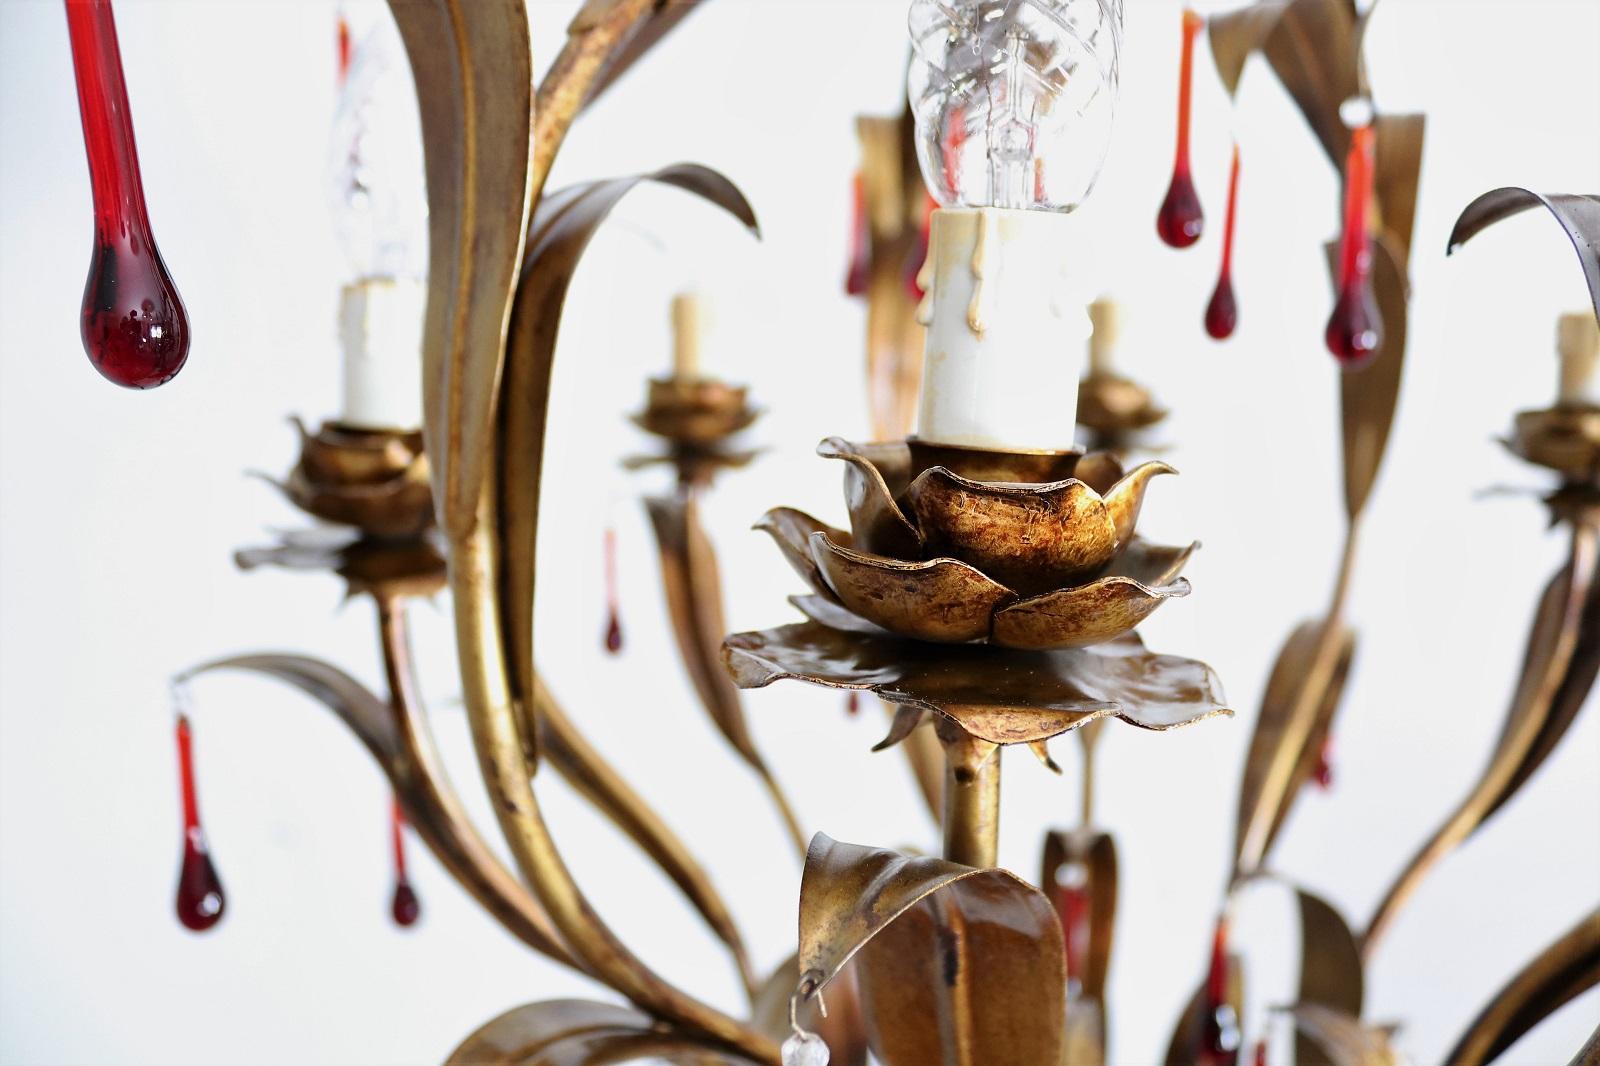 Italian Midcentury Gilt Florentine Chandelier with Red Murano Glass Drops, 1970s For Sale 1